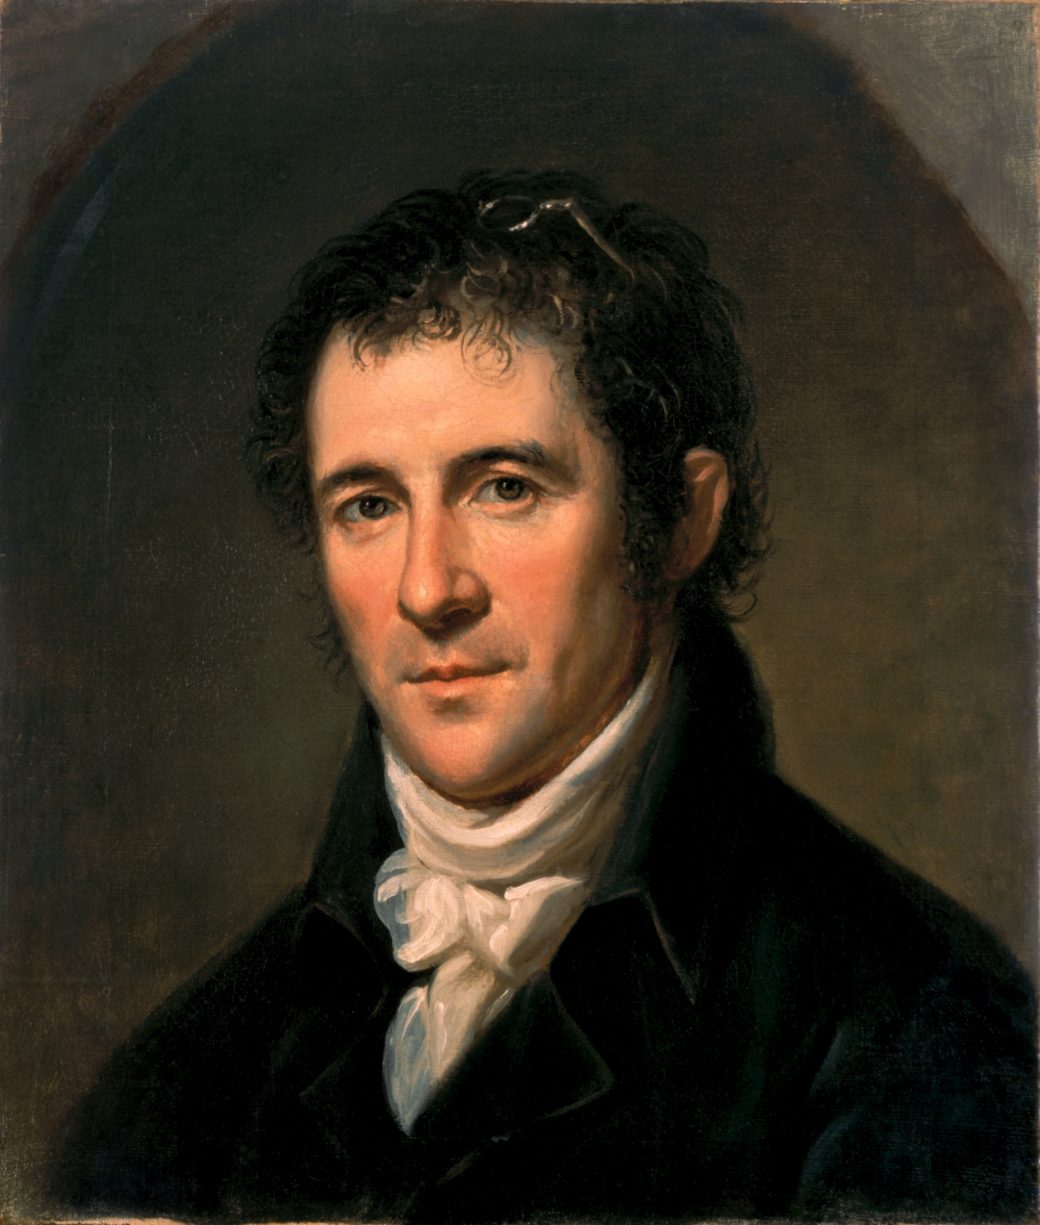 Portrait of Benjamin Latrobe, second Architect of the Capitol, by artist Charles Wilson Peale, c. 1804. Latrobe served two presidents, Thomas Jefferson and James Madison. (White House Collection)